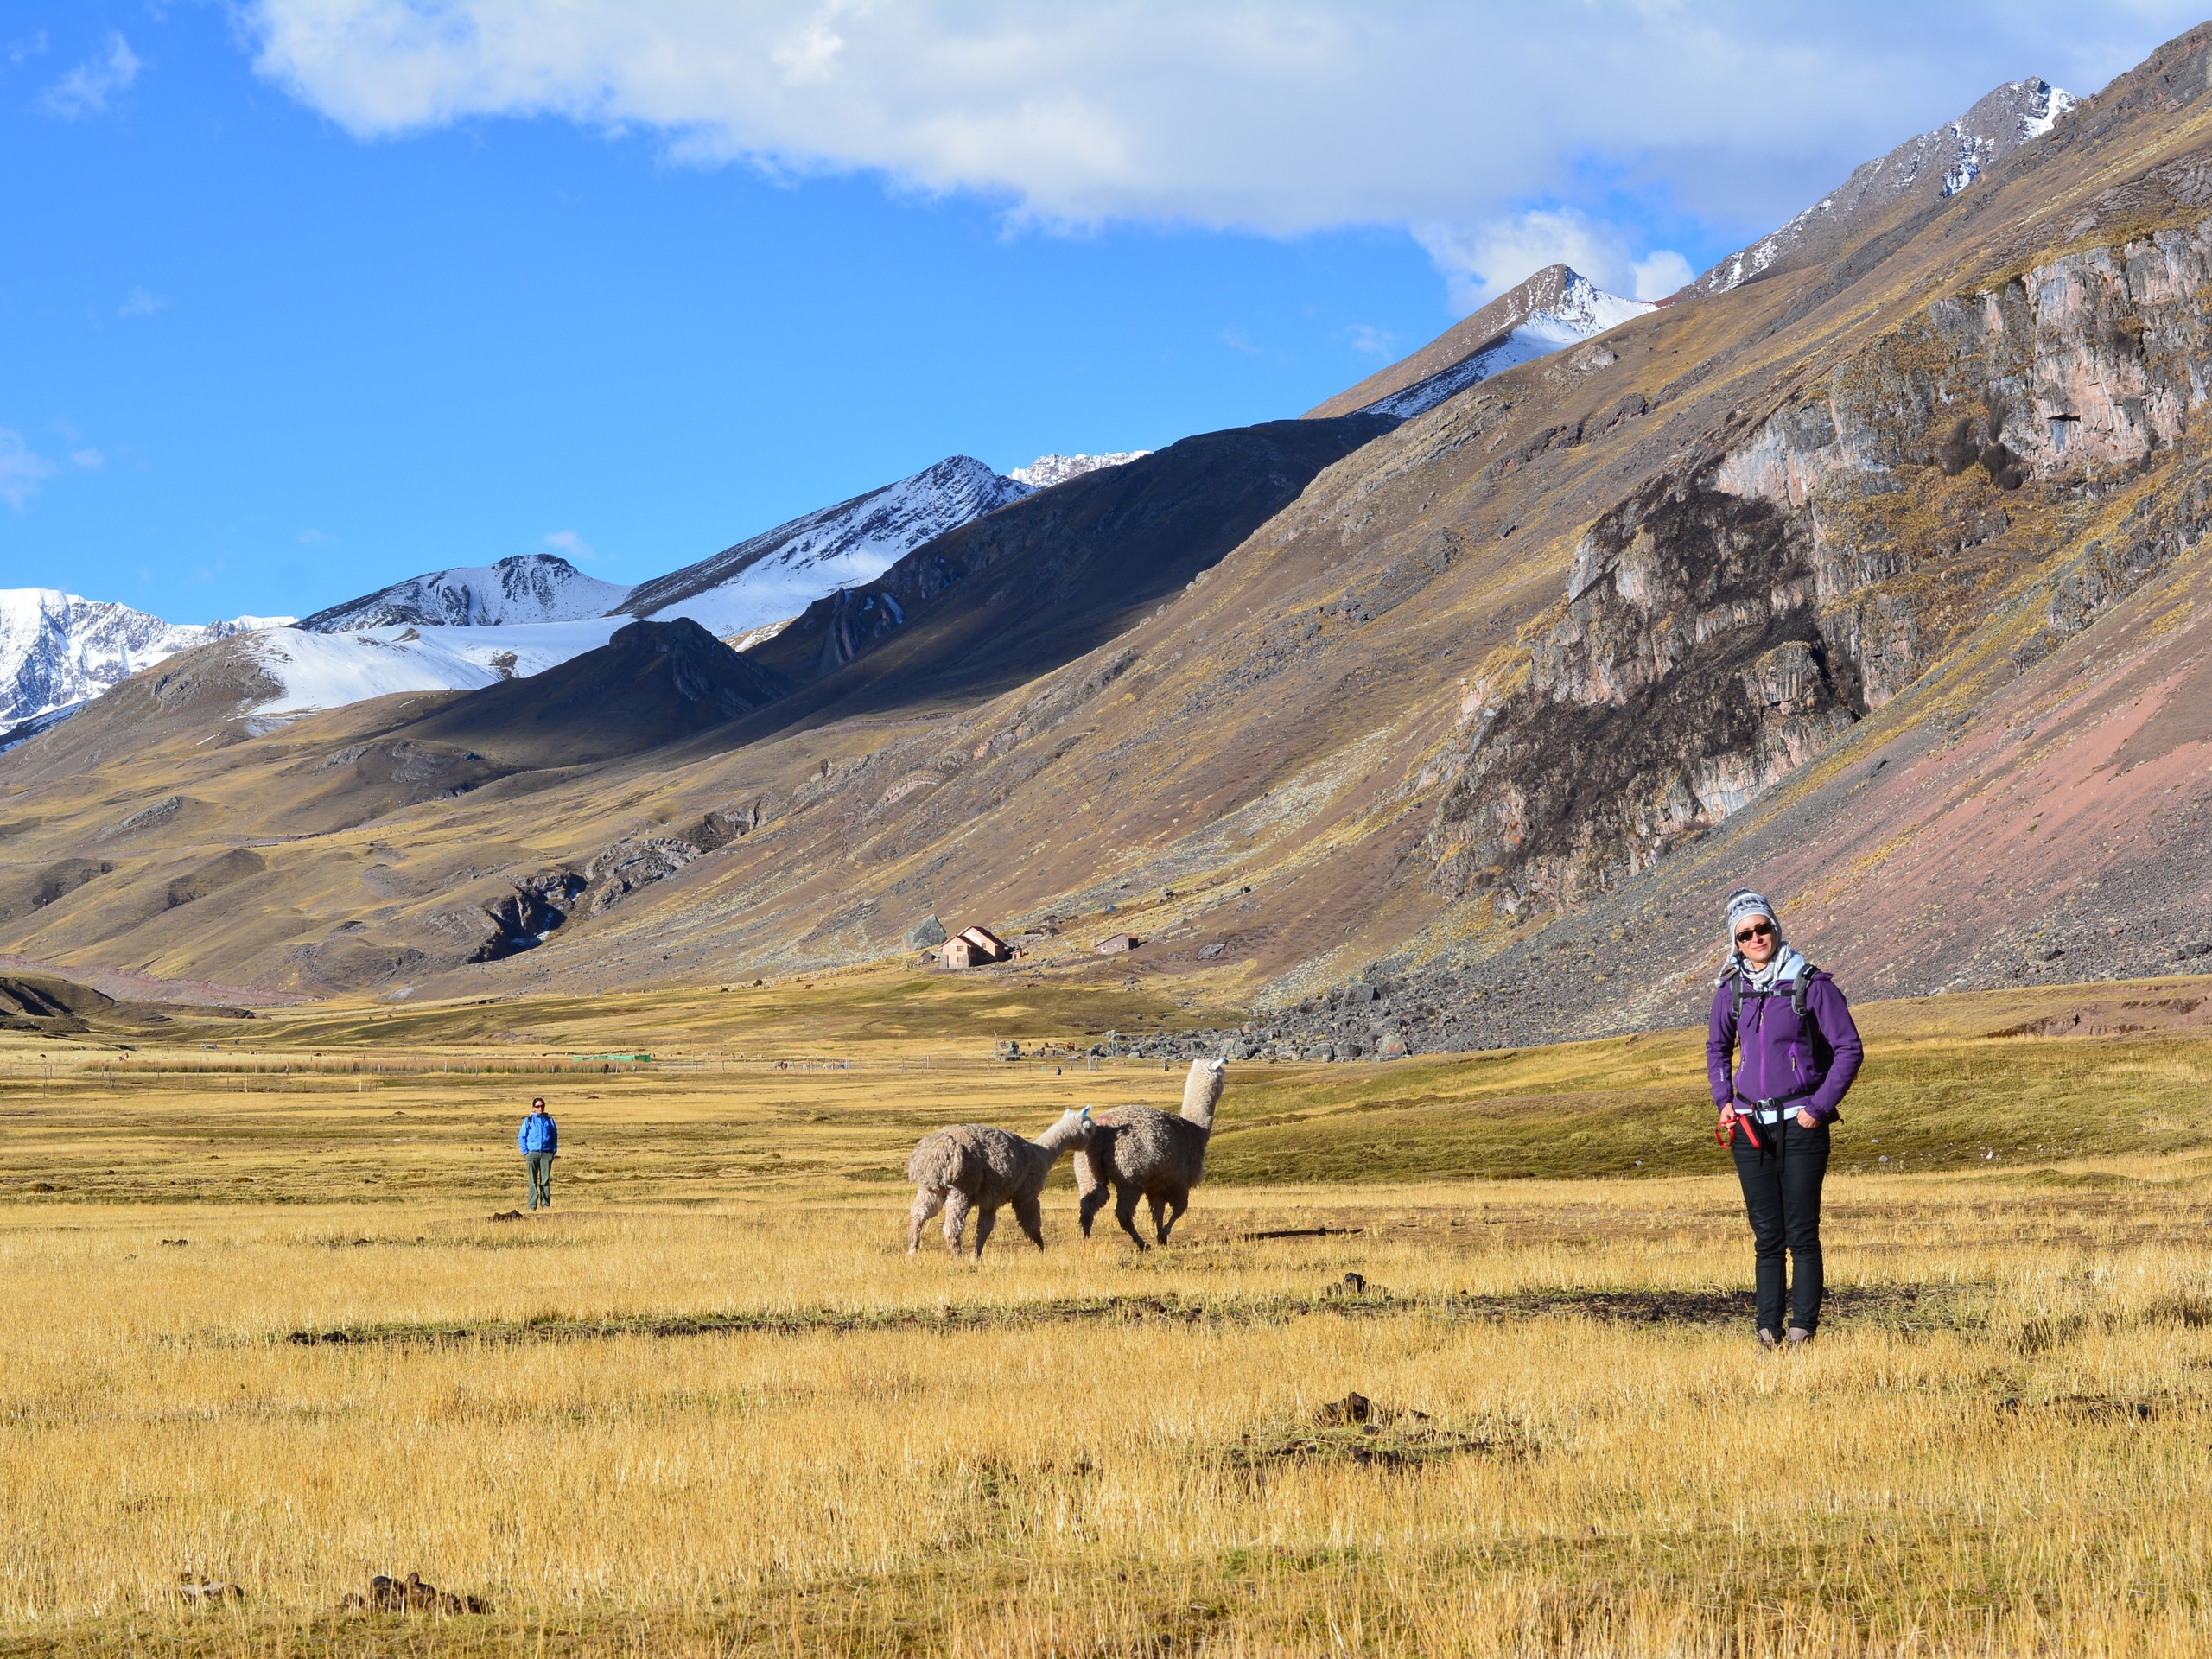 Group of trekkers approaching the herd on alpacas in Pampa Chillca